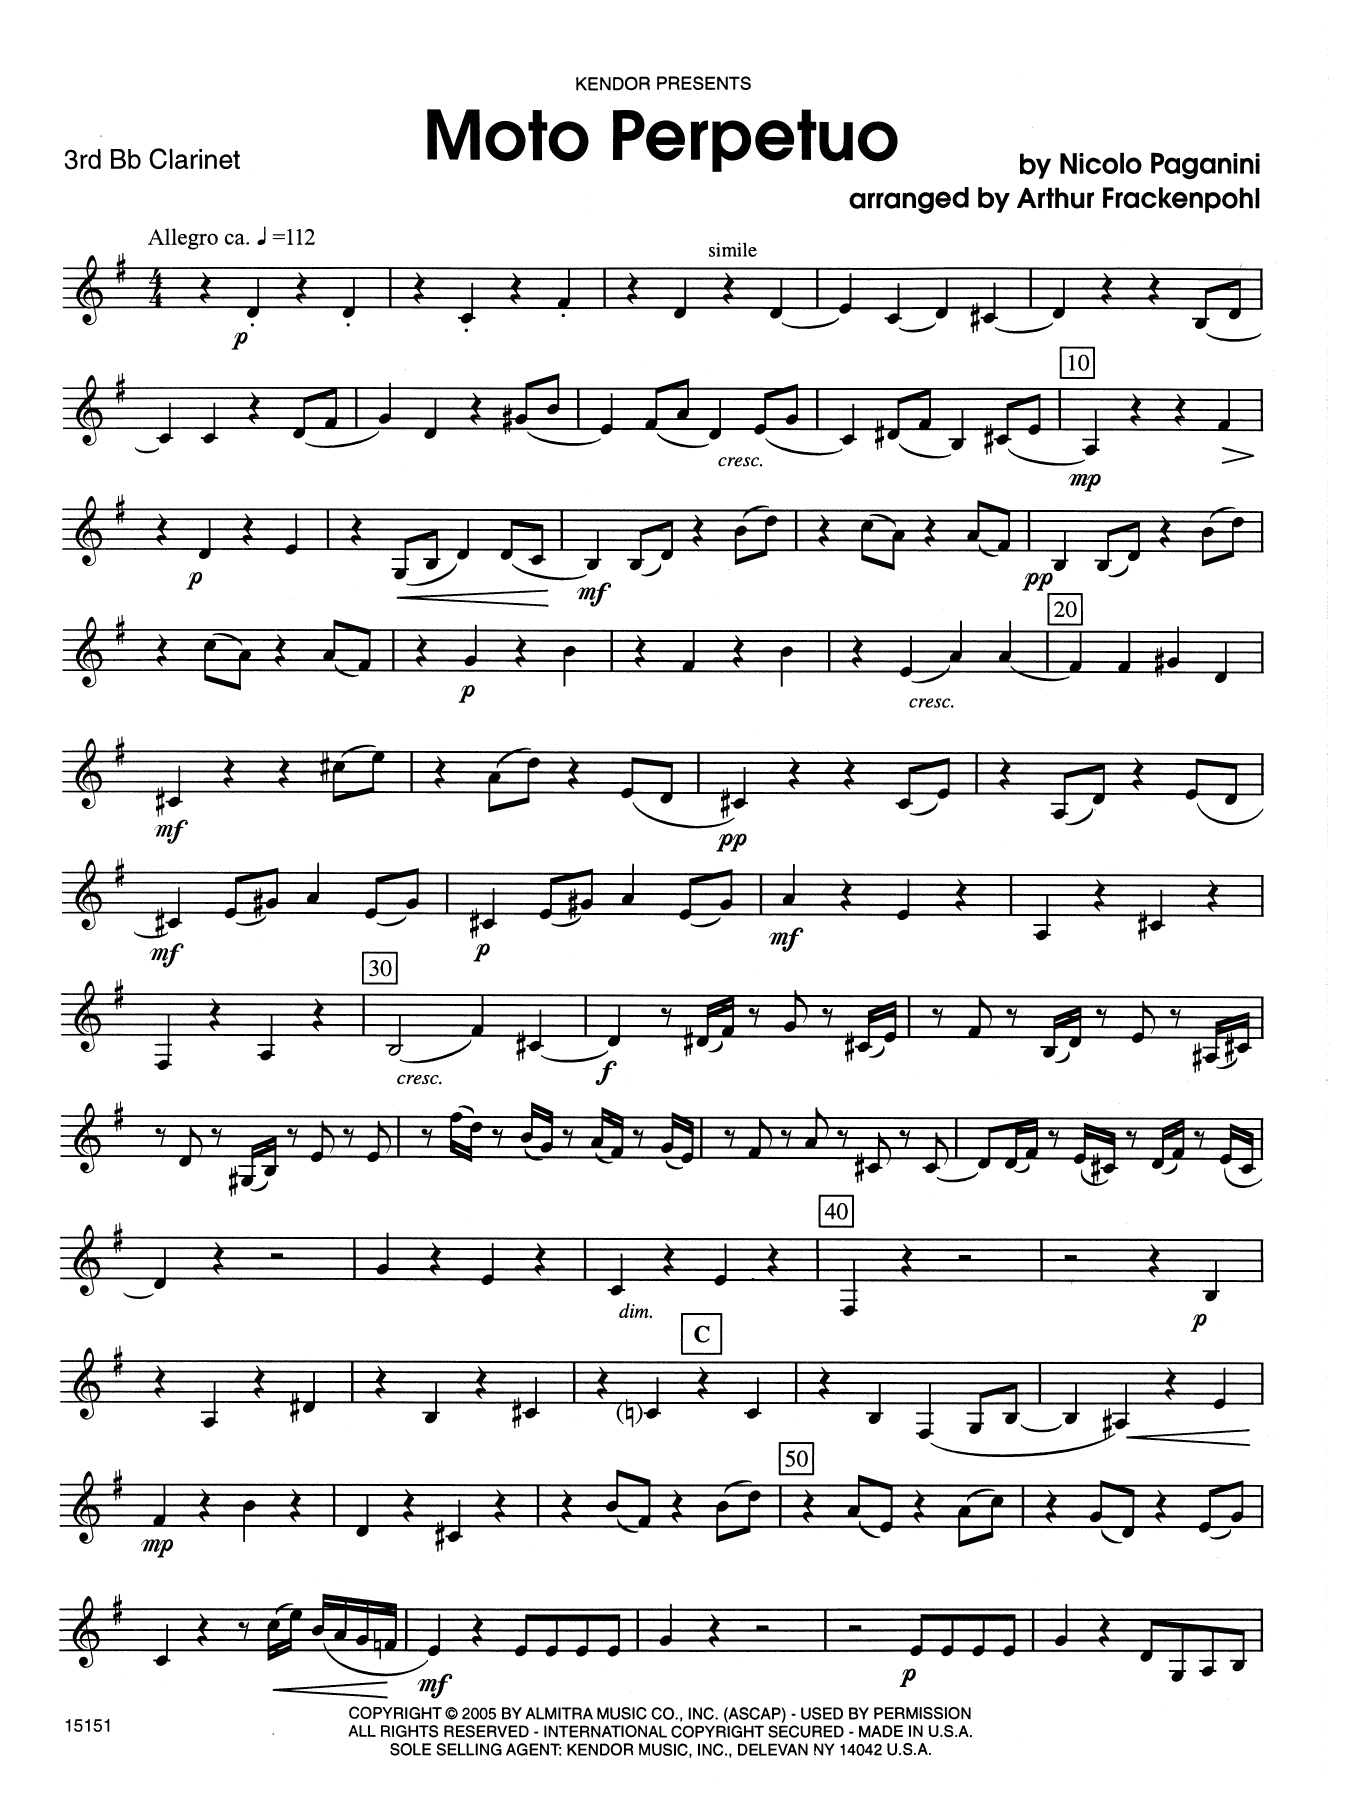 Arthur Frackenpohl Moto Perpetuo - 3rd Bb Clarinet sheet music notes and chords. Download Printable PDF.